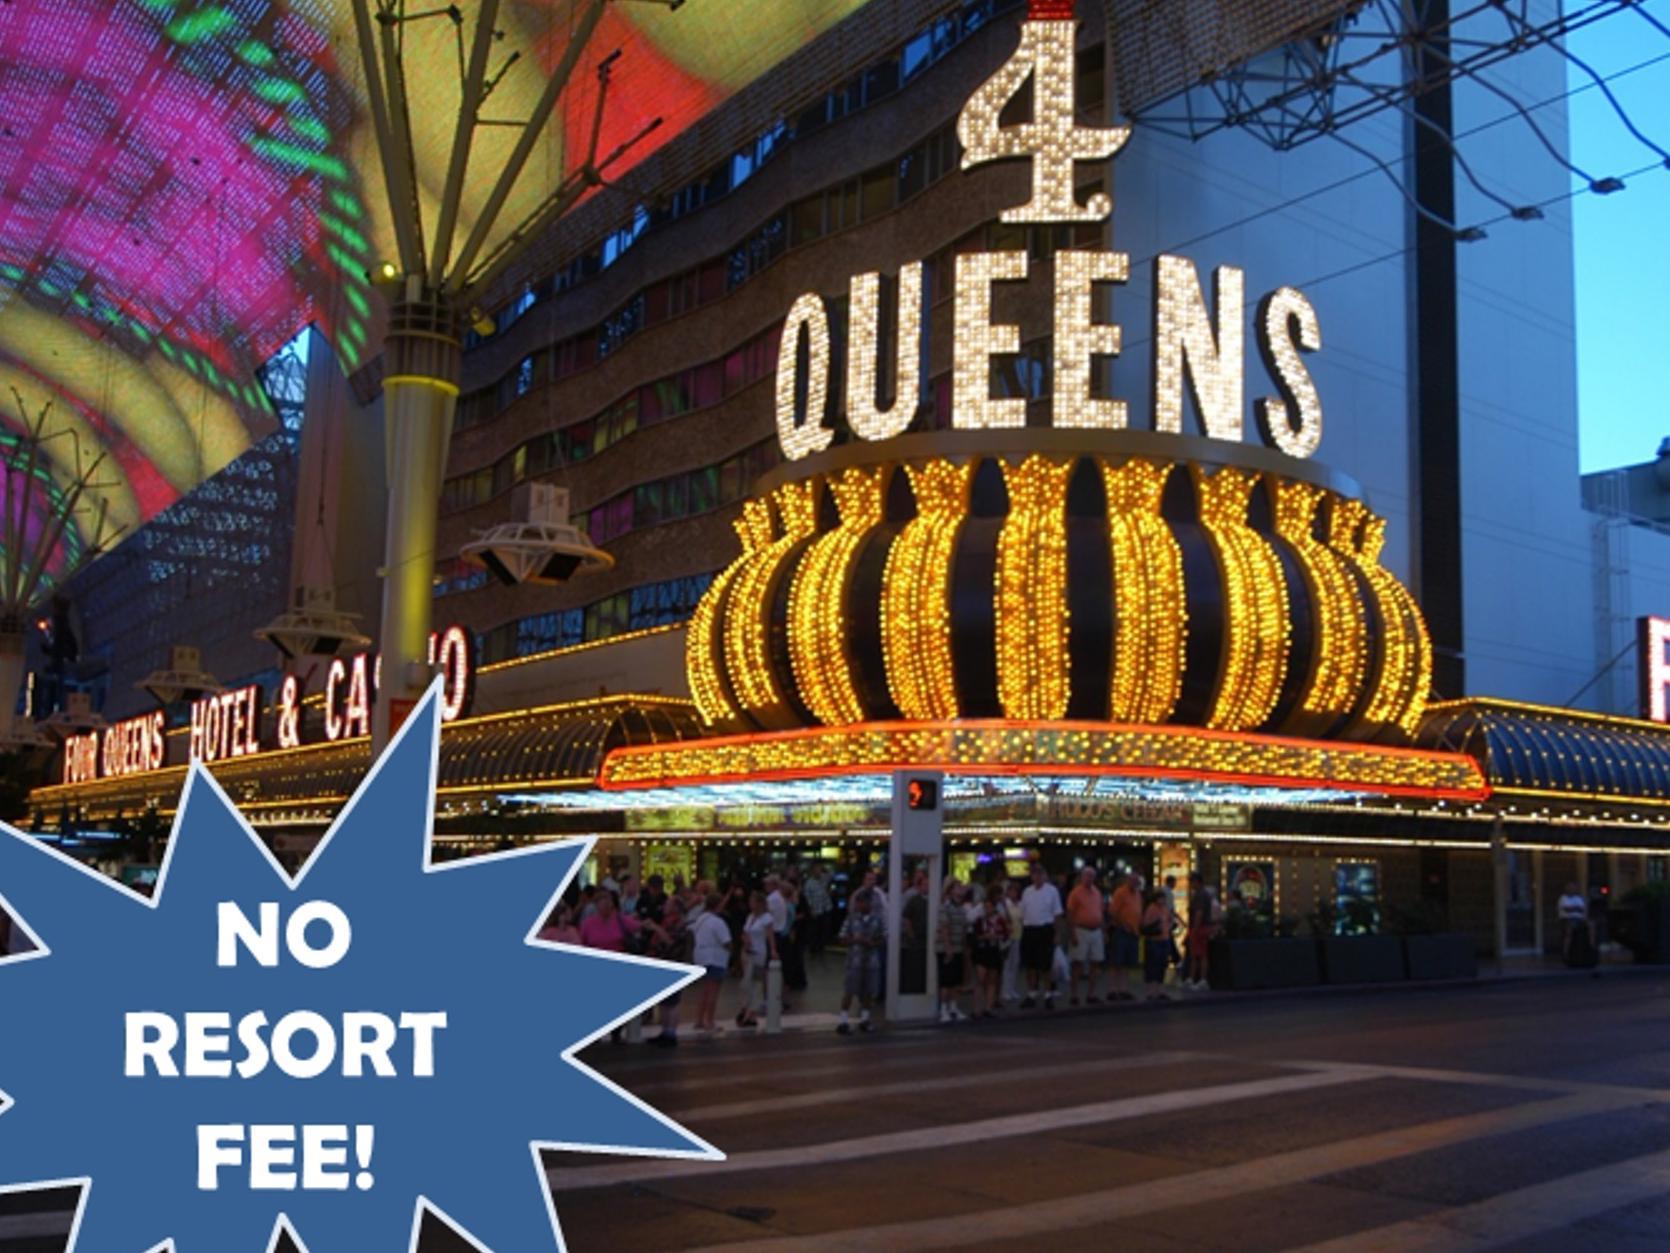 Four Queens Hotel & Casino Kalasin FAQ 2017, What facilities are there in Four Queens Hotel & Casino Kalasin 2017, What Languages Spoken are Supported in Four Queens Hotel & Casino Kalasin 2017, Which payment cards are accepted in Four Queens Hotel & Casino Kalasin , Kalasin Four Queens Hotel & Casino room facilities and services Q&A 2017, Kalasin Four Queens Hotel & Casino online booking services 2017, Kalasin Four Queens Hotel & Casino address 2017, Kalasin Four Queens Hotel & Casino telephone number 2017,Kalasin Four Queens Hotel & Casino map 2017, Kalasin Four Queens Hotel & Casino traffic guide 2017, how to go Kalasin Four Queens Hotel & Casino, Kalasin Four Queens Hotel & Casino booking online 2017, Kalasin Four Queens Hotel & Casino room types 2017.